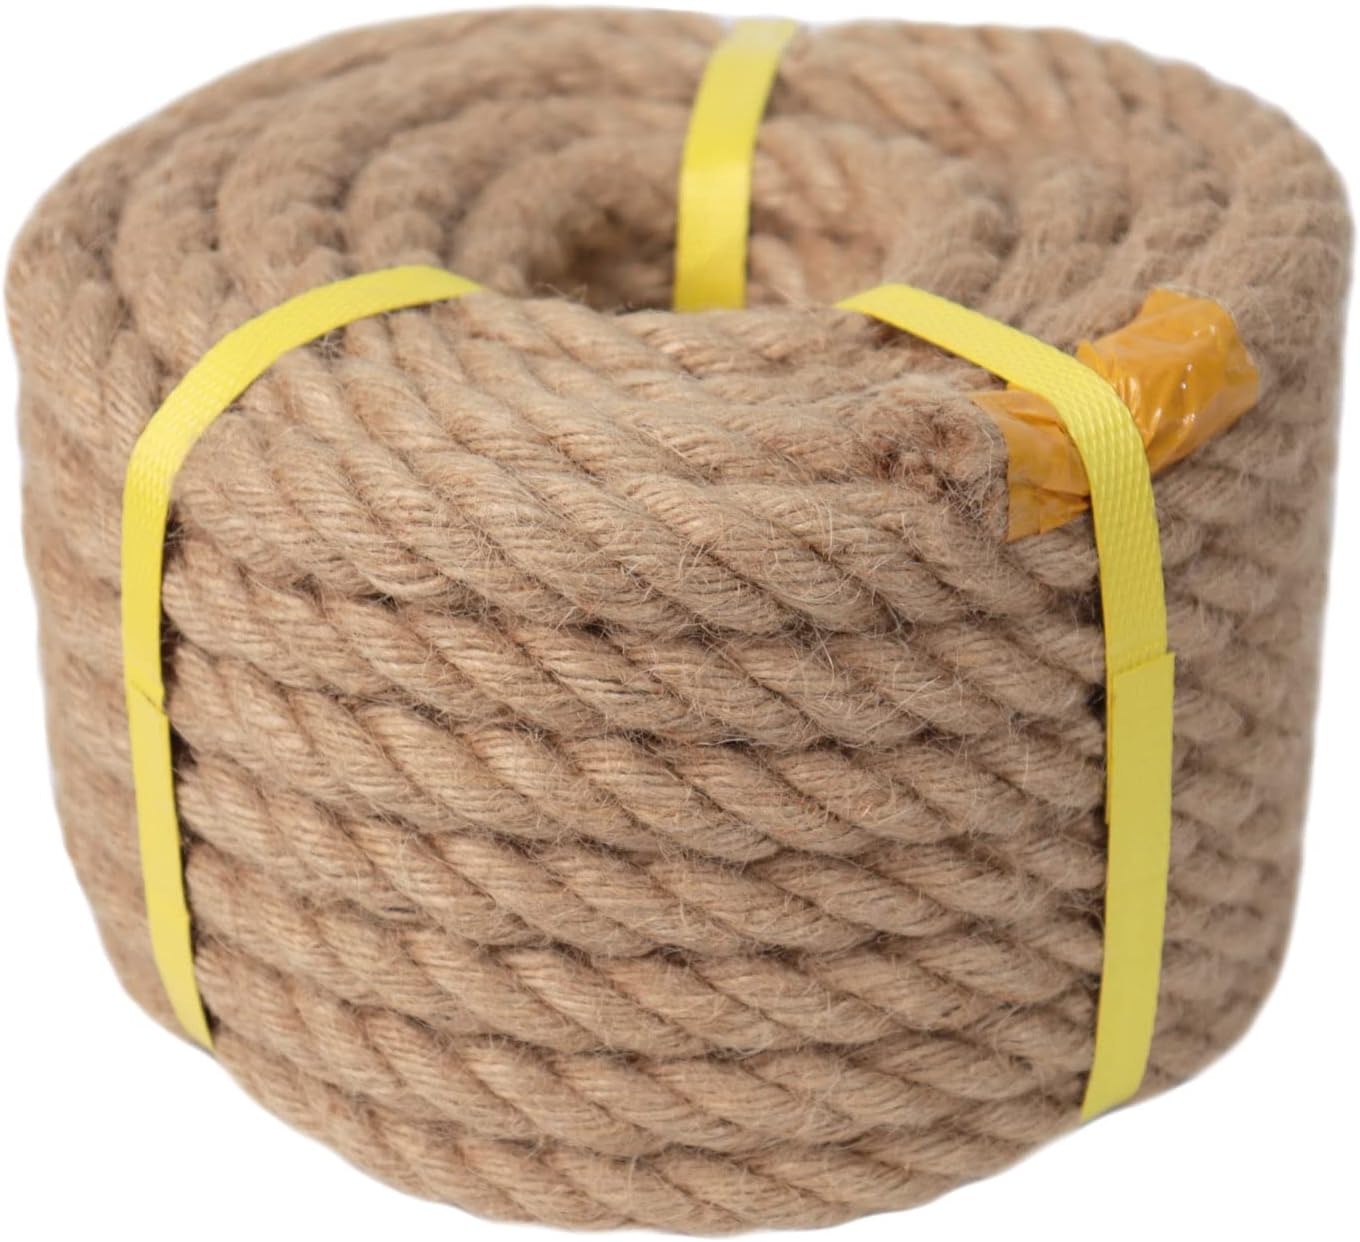 CRAYZA Twisted Manila Rope (3/4 in x 50 ft) Jute Rope Natural Hemp Rope for Crafting, Swing Bed, Railing, Docks